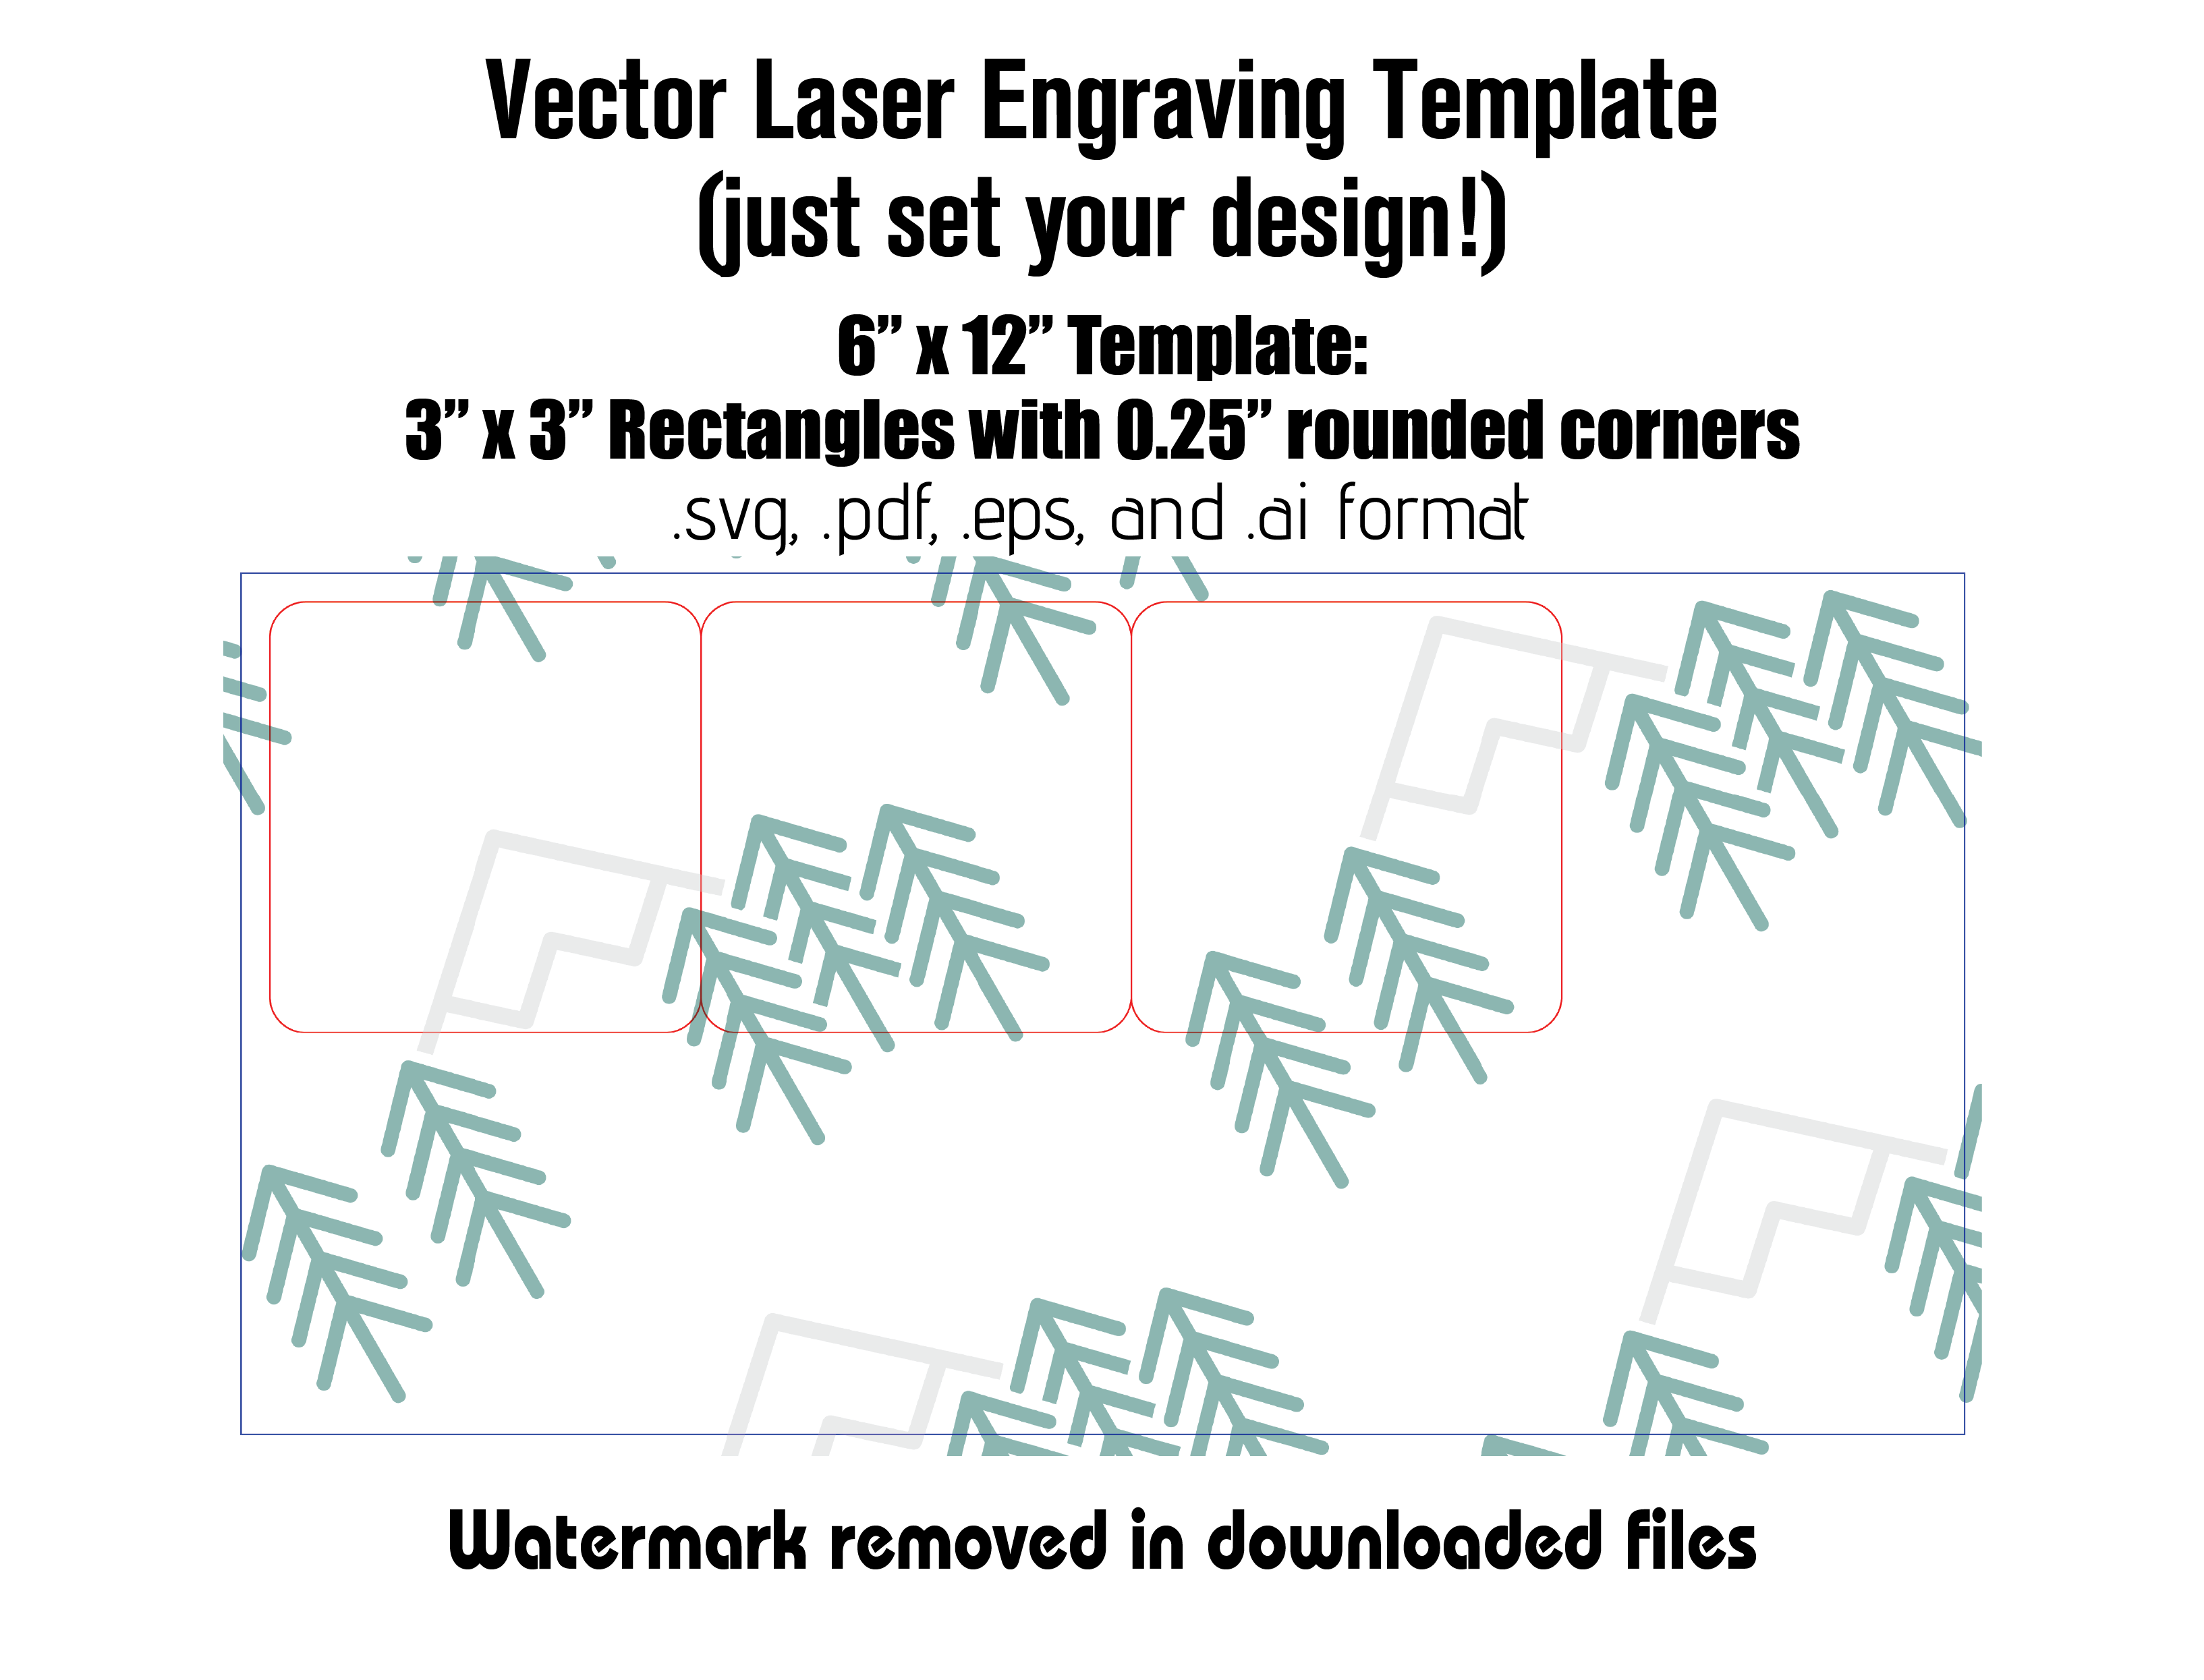 Digital Laser Cutting Template: 3" x 3" Rectangles w/Rounded Corners - 6" x 12" Sheet Size Digital Laser Engraving Files Craftworks NW 